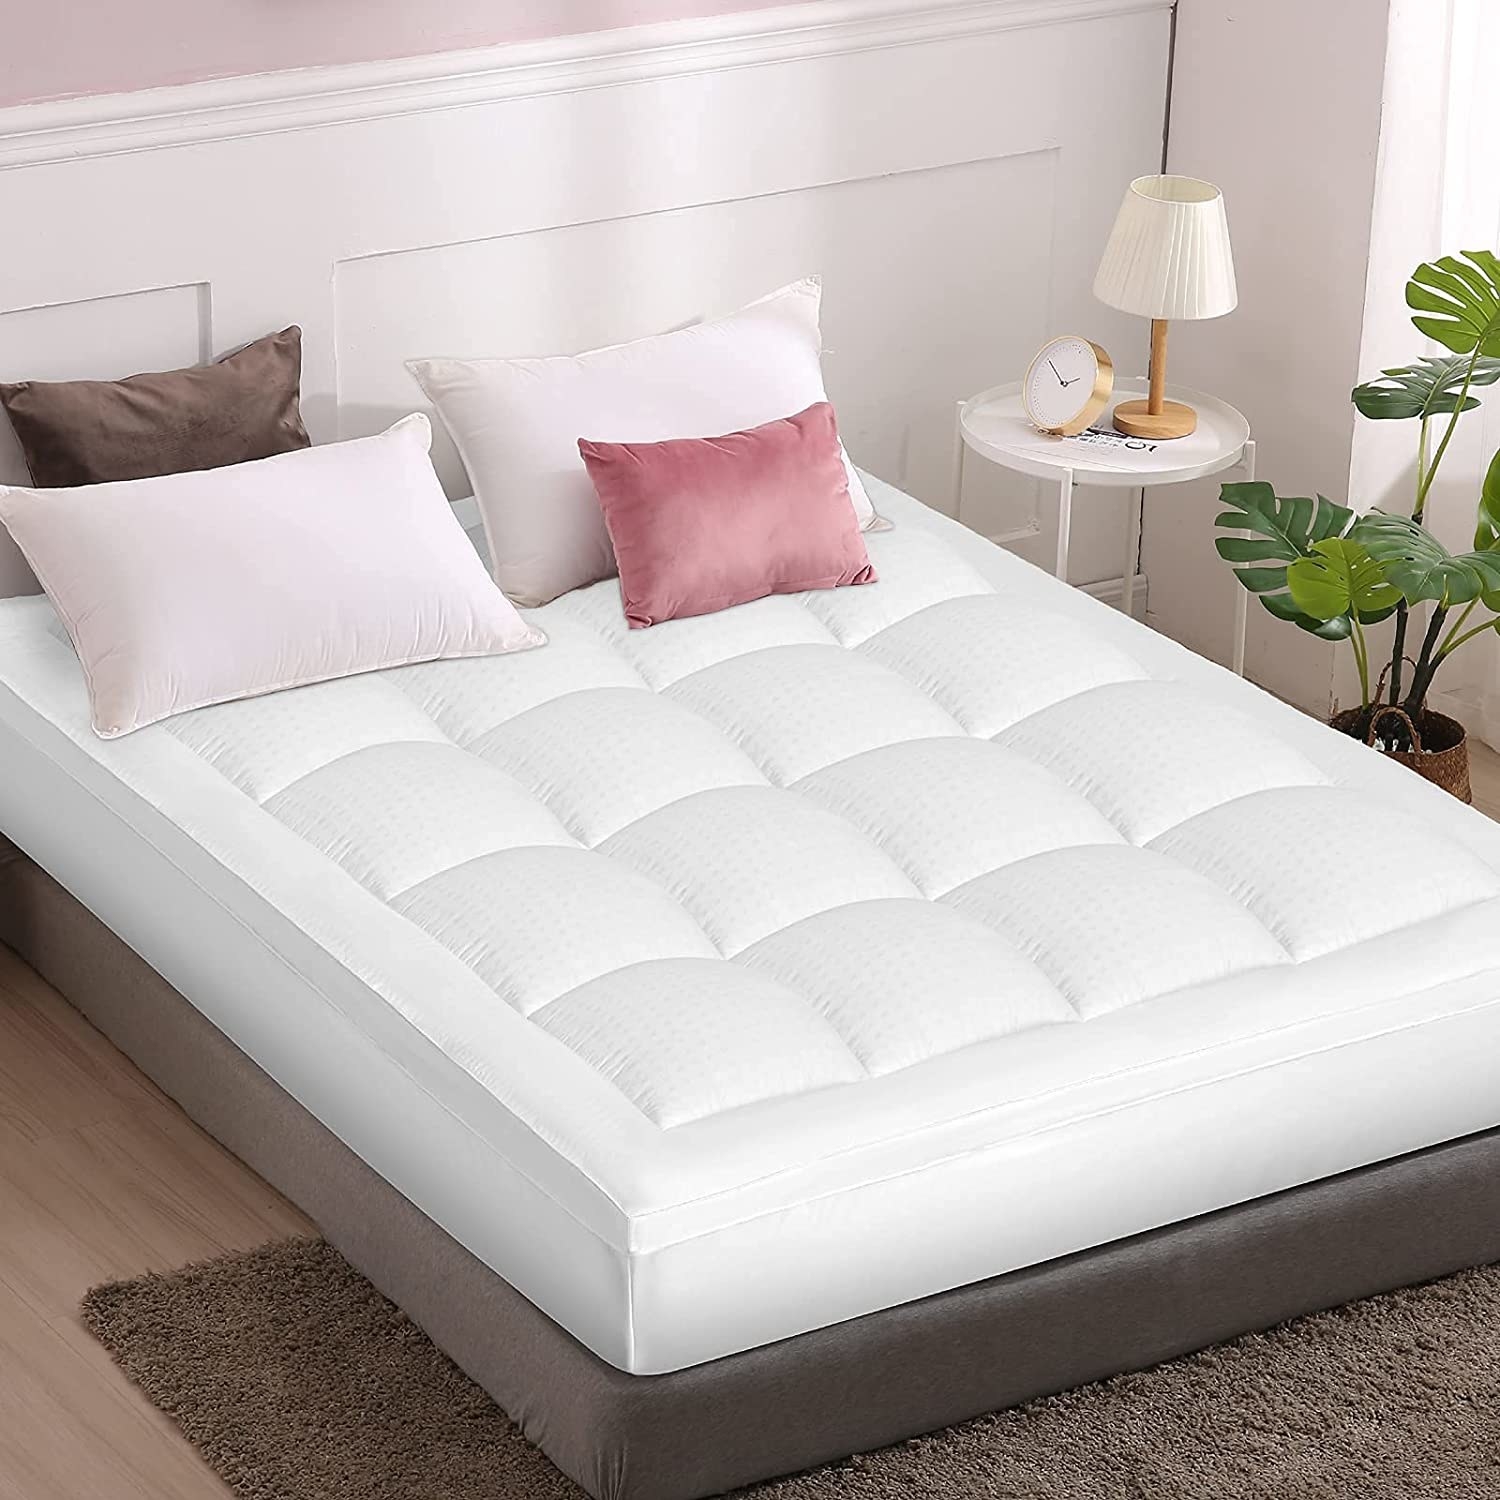 a quilted mattress pad